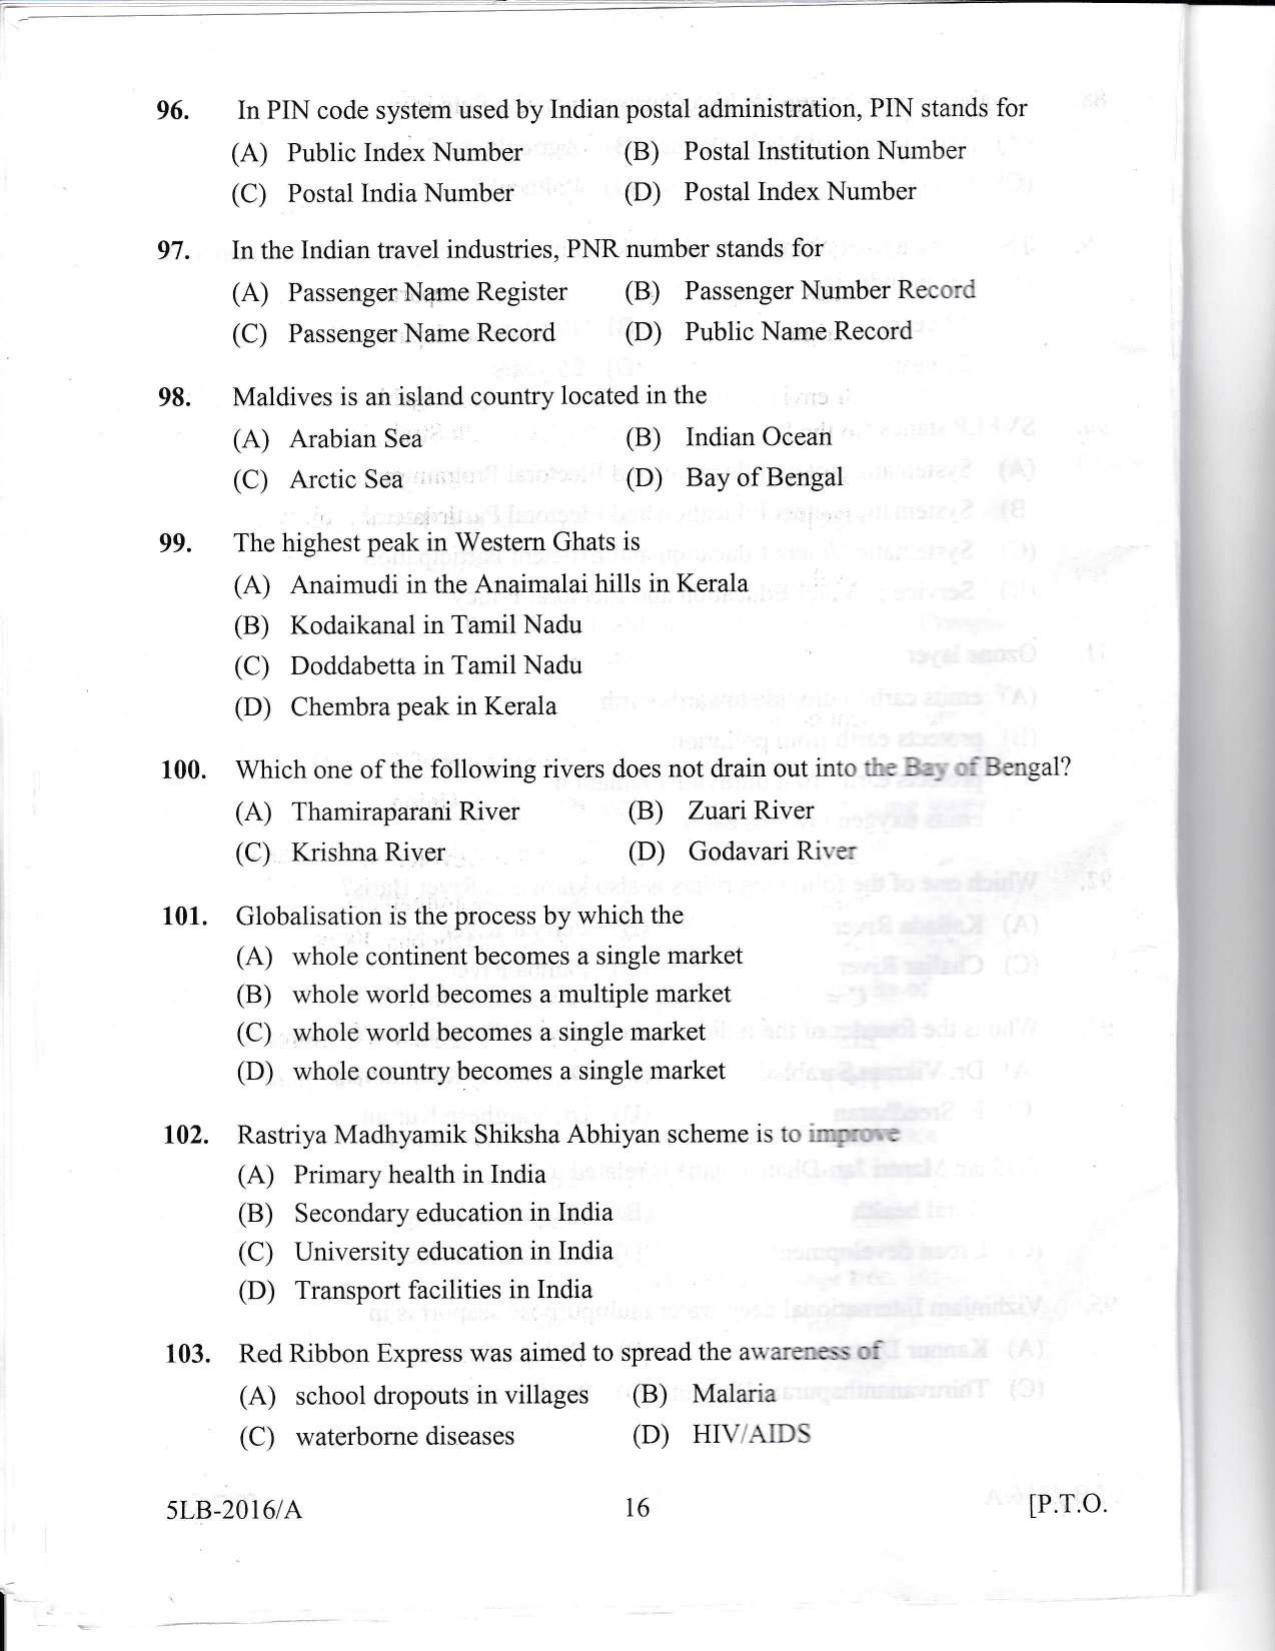 KLEE 5 Year LLB Exam 2016 Question Paper - Page 16